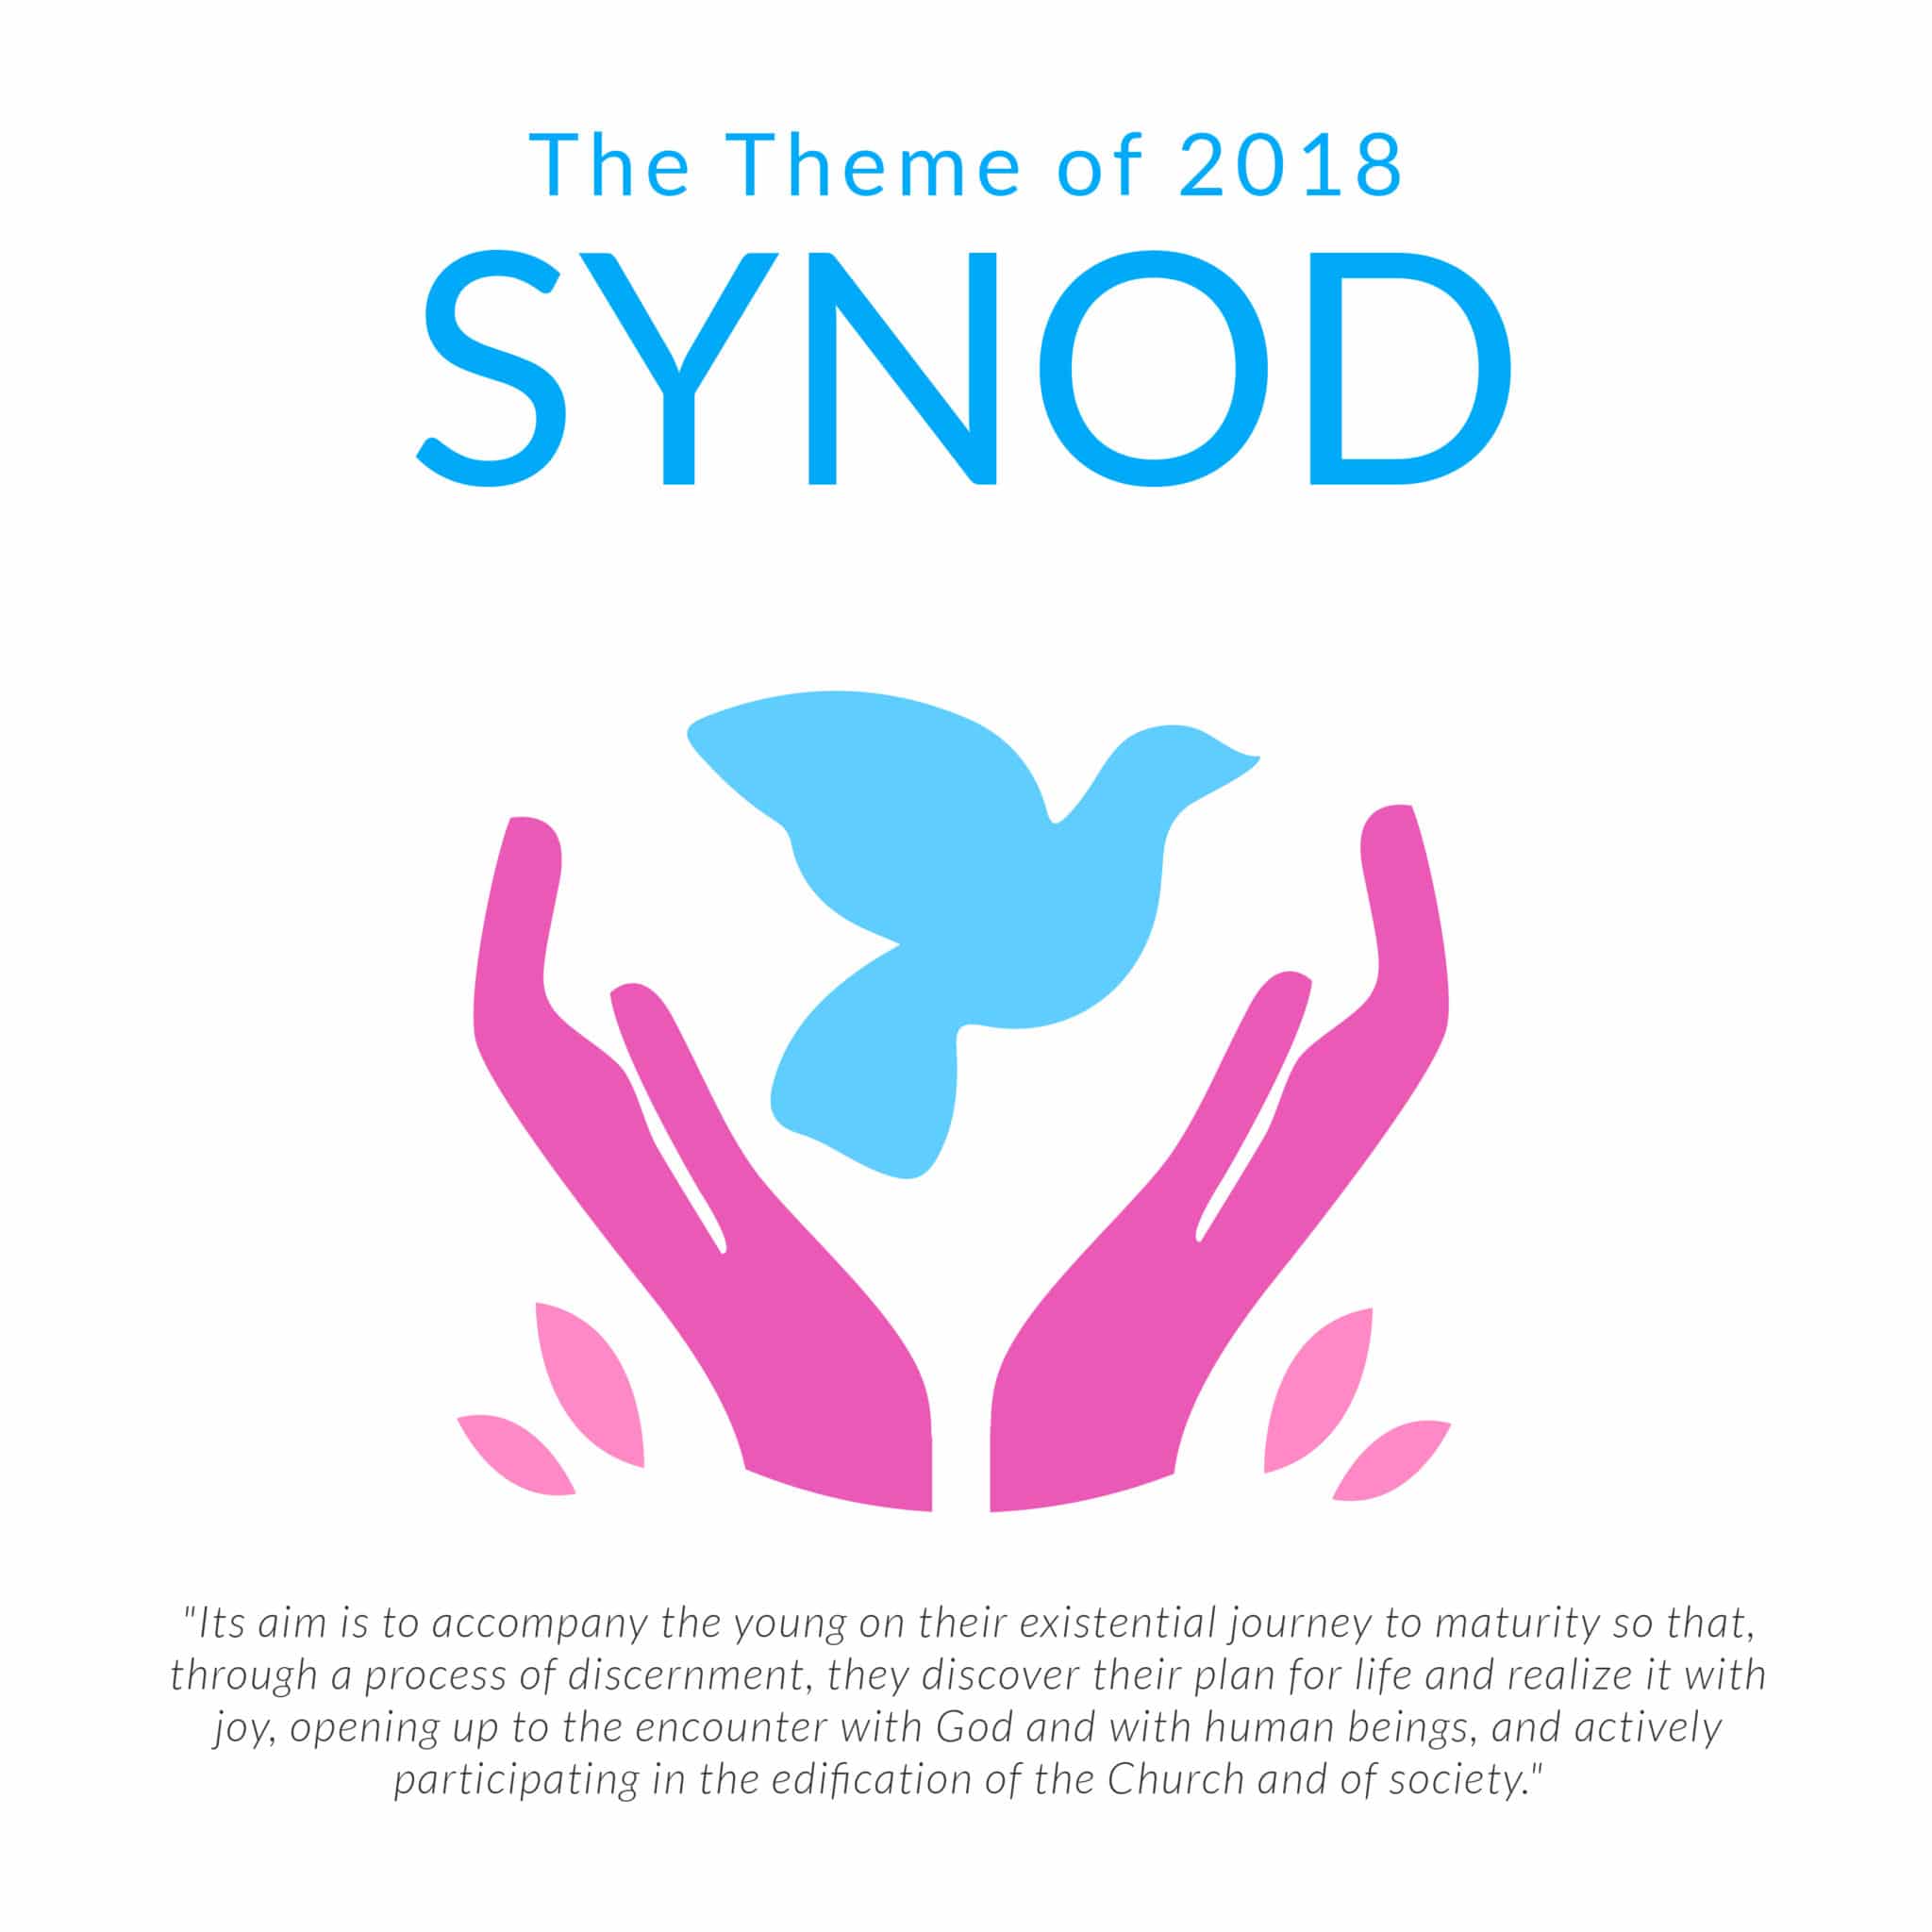 theme of 2018 -SYNOD